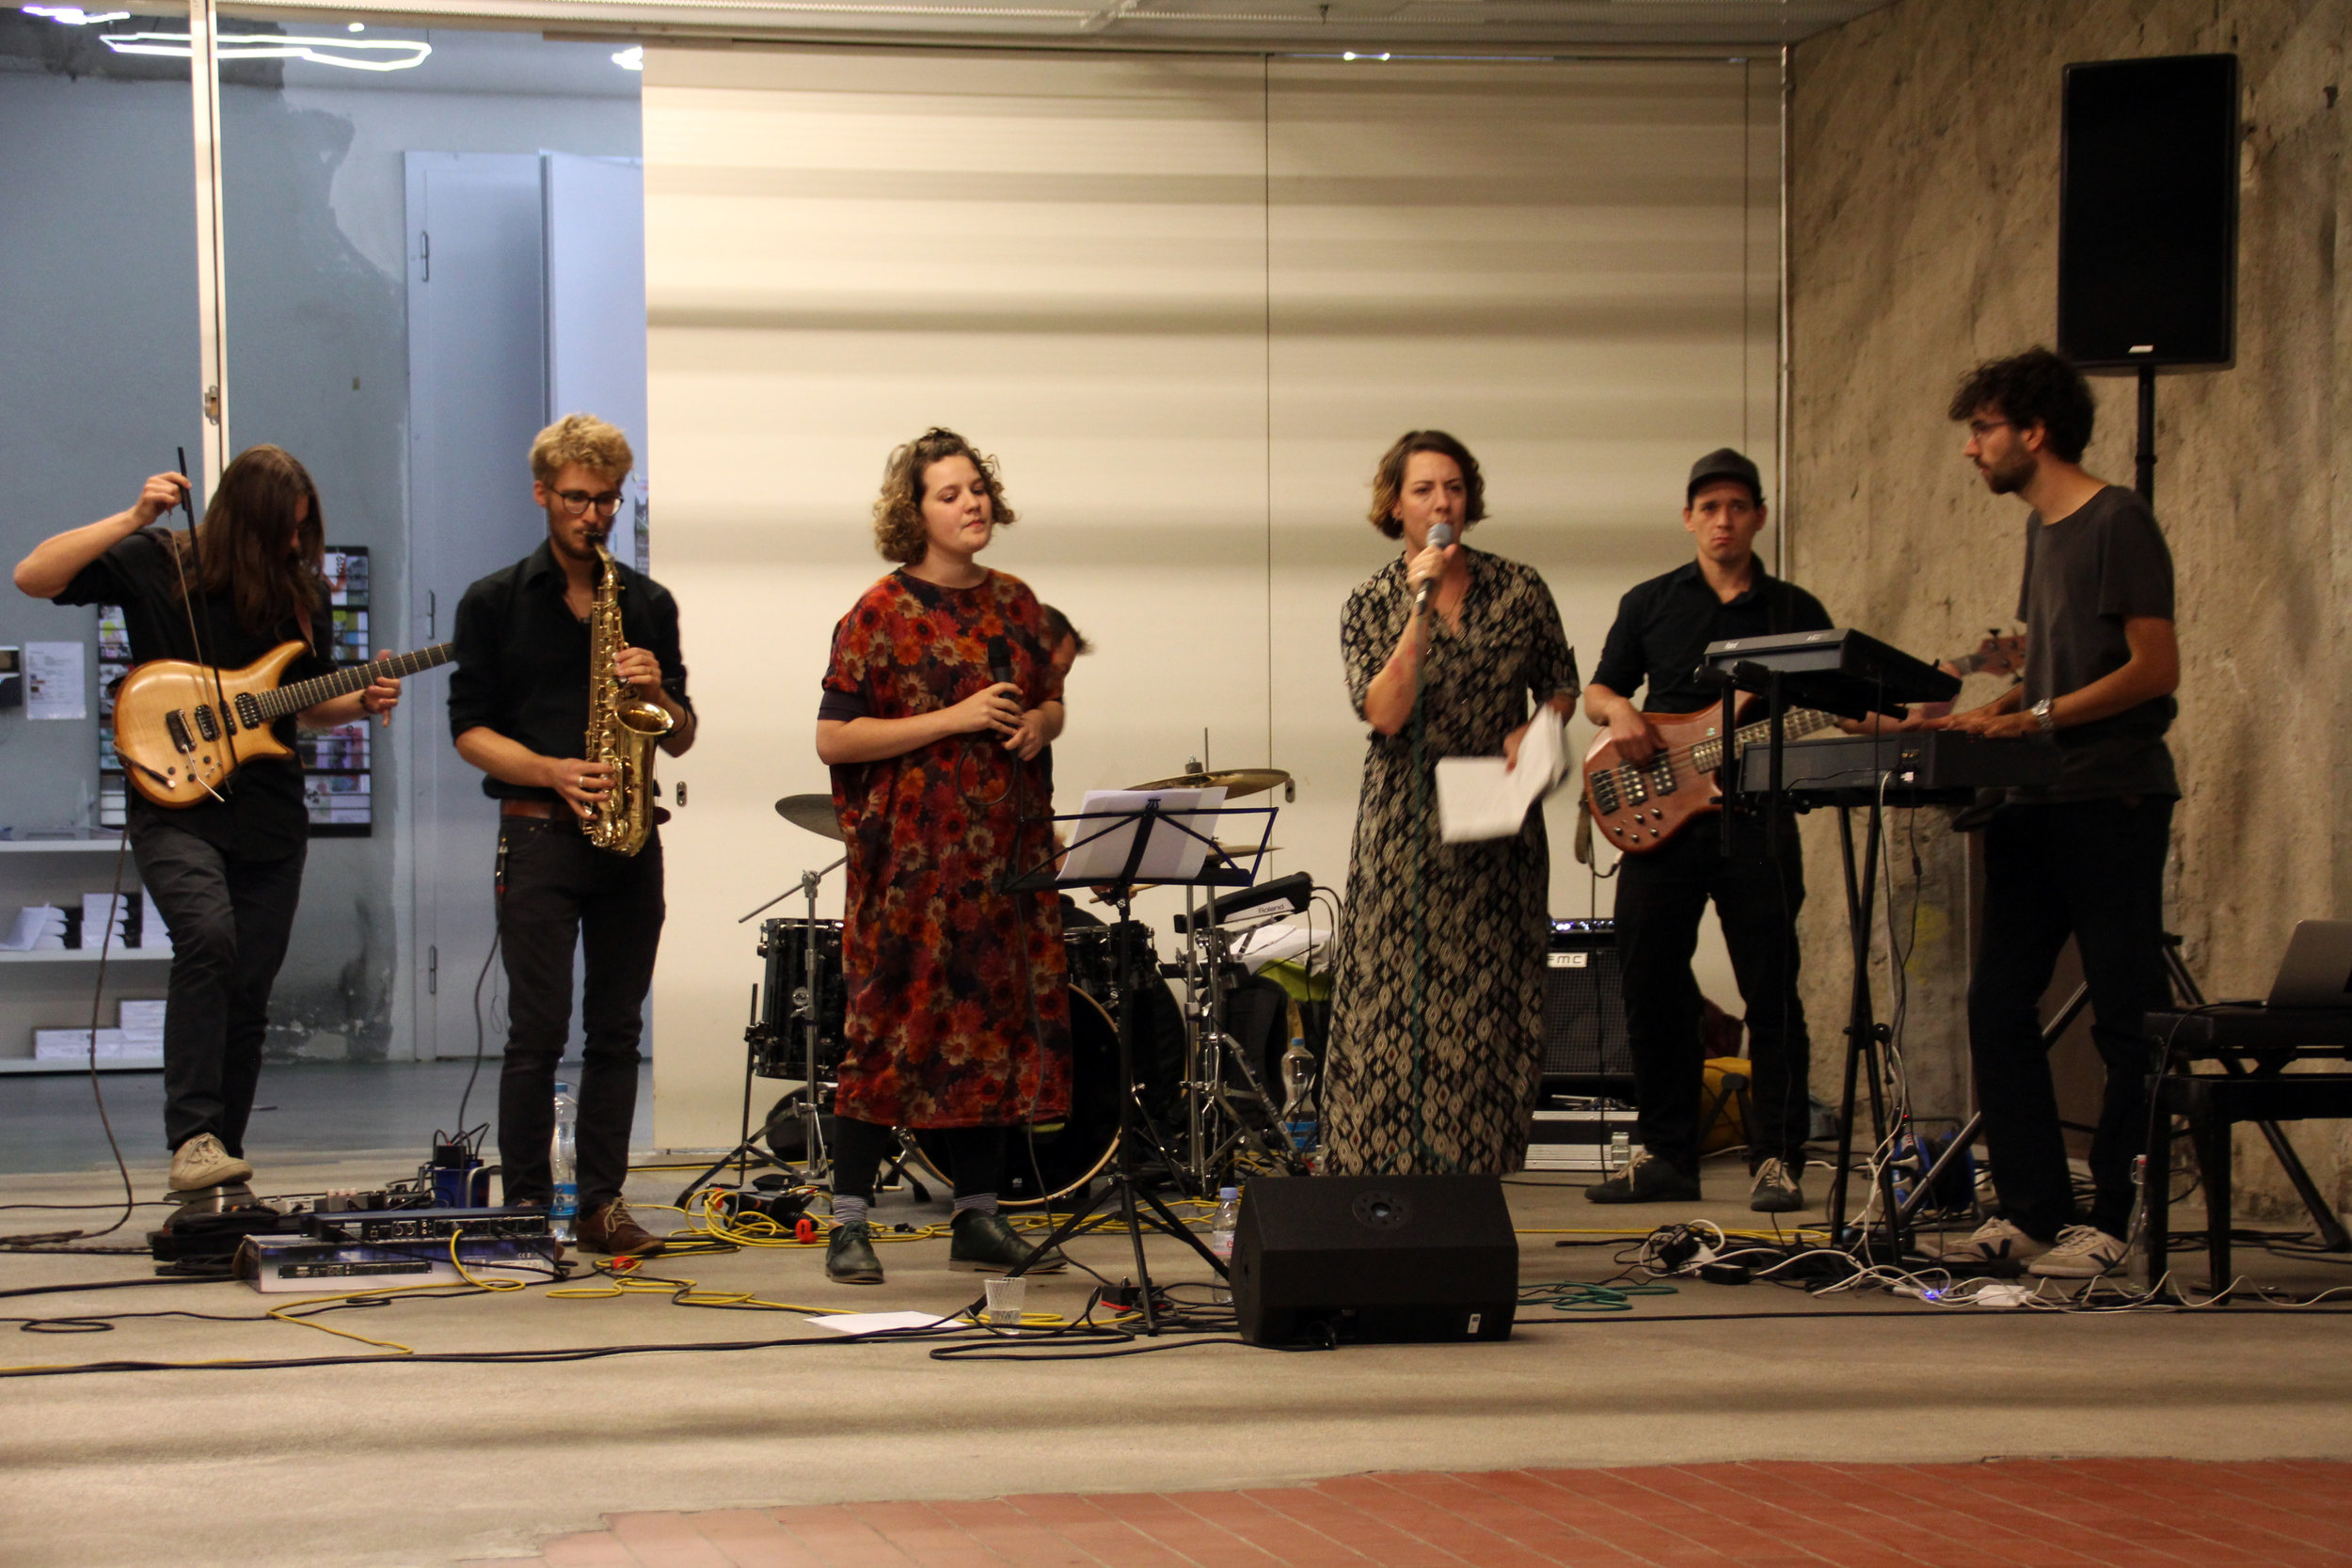 Band "Waiting Line" (Berne) at opening reception